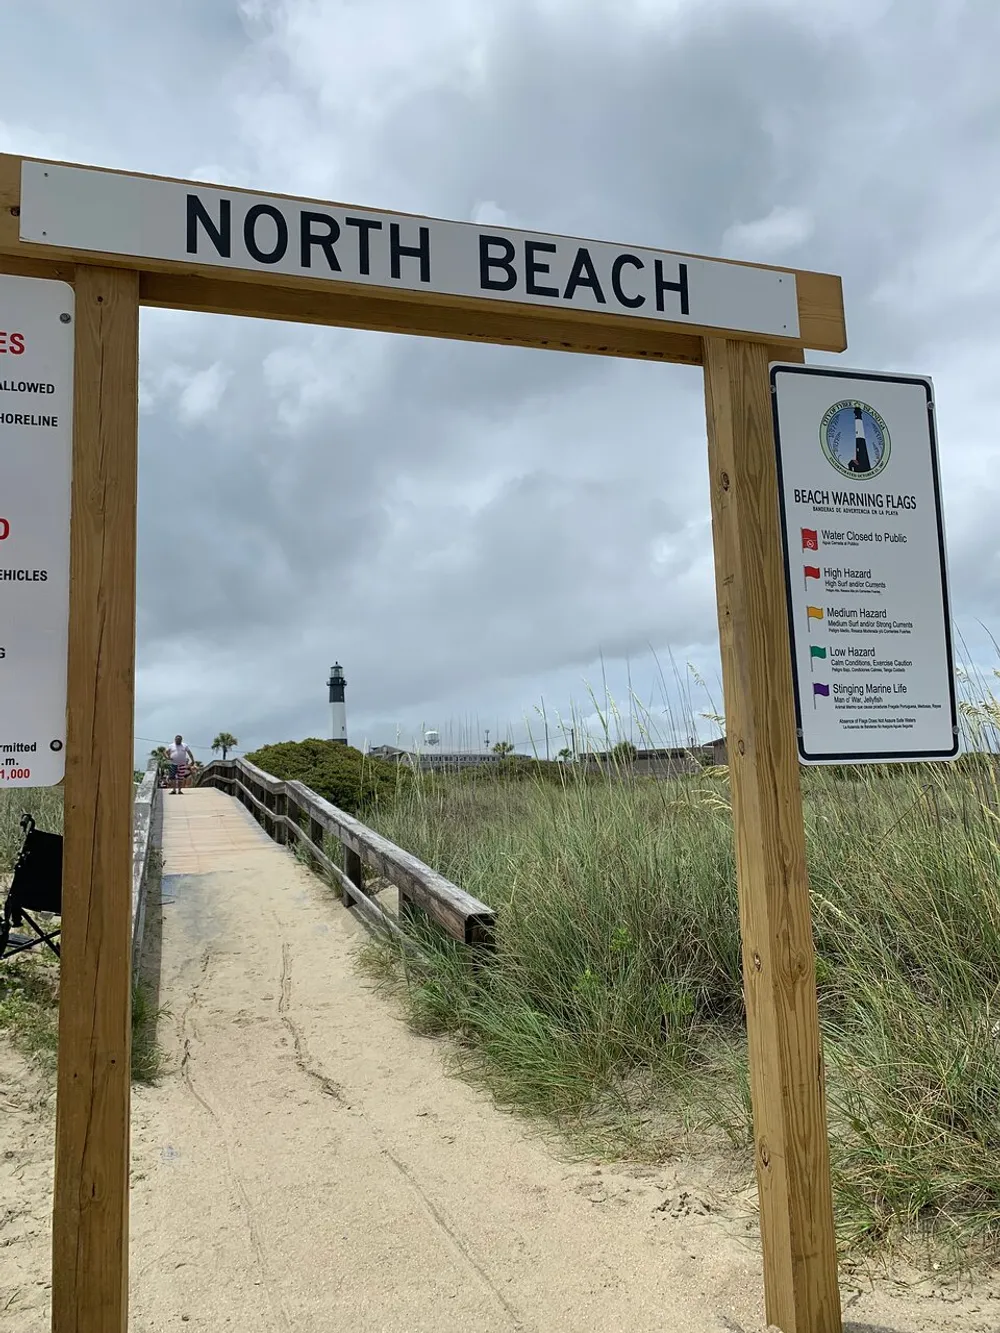 The image shows the entrance to North Beach with a signpost and a beach warning flags board a sandy pathway leading to the beach and a lighthouse in the background under an overcast sky